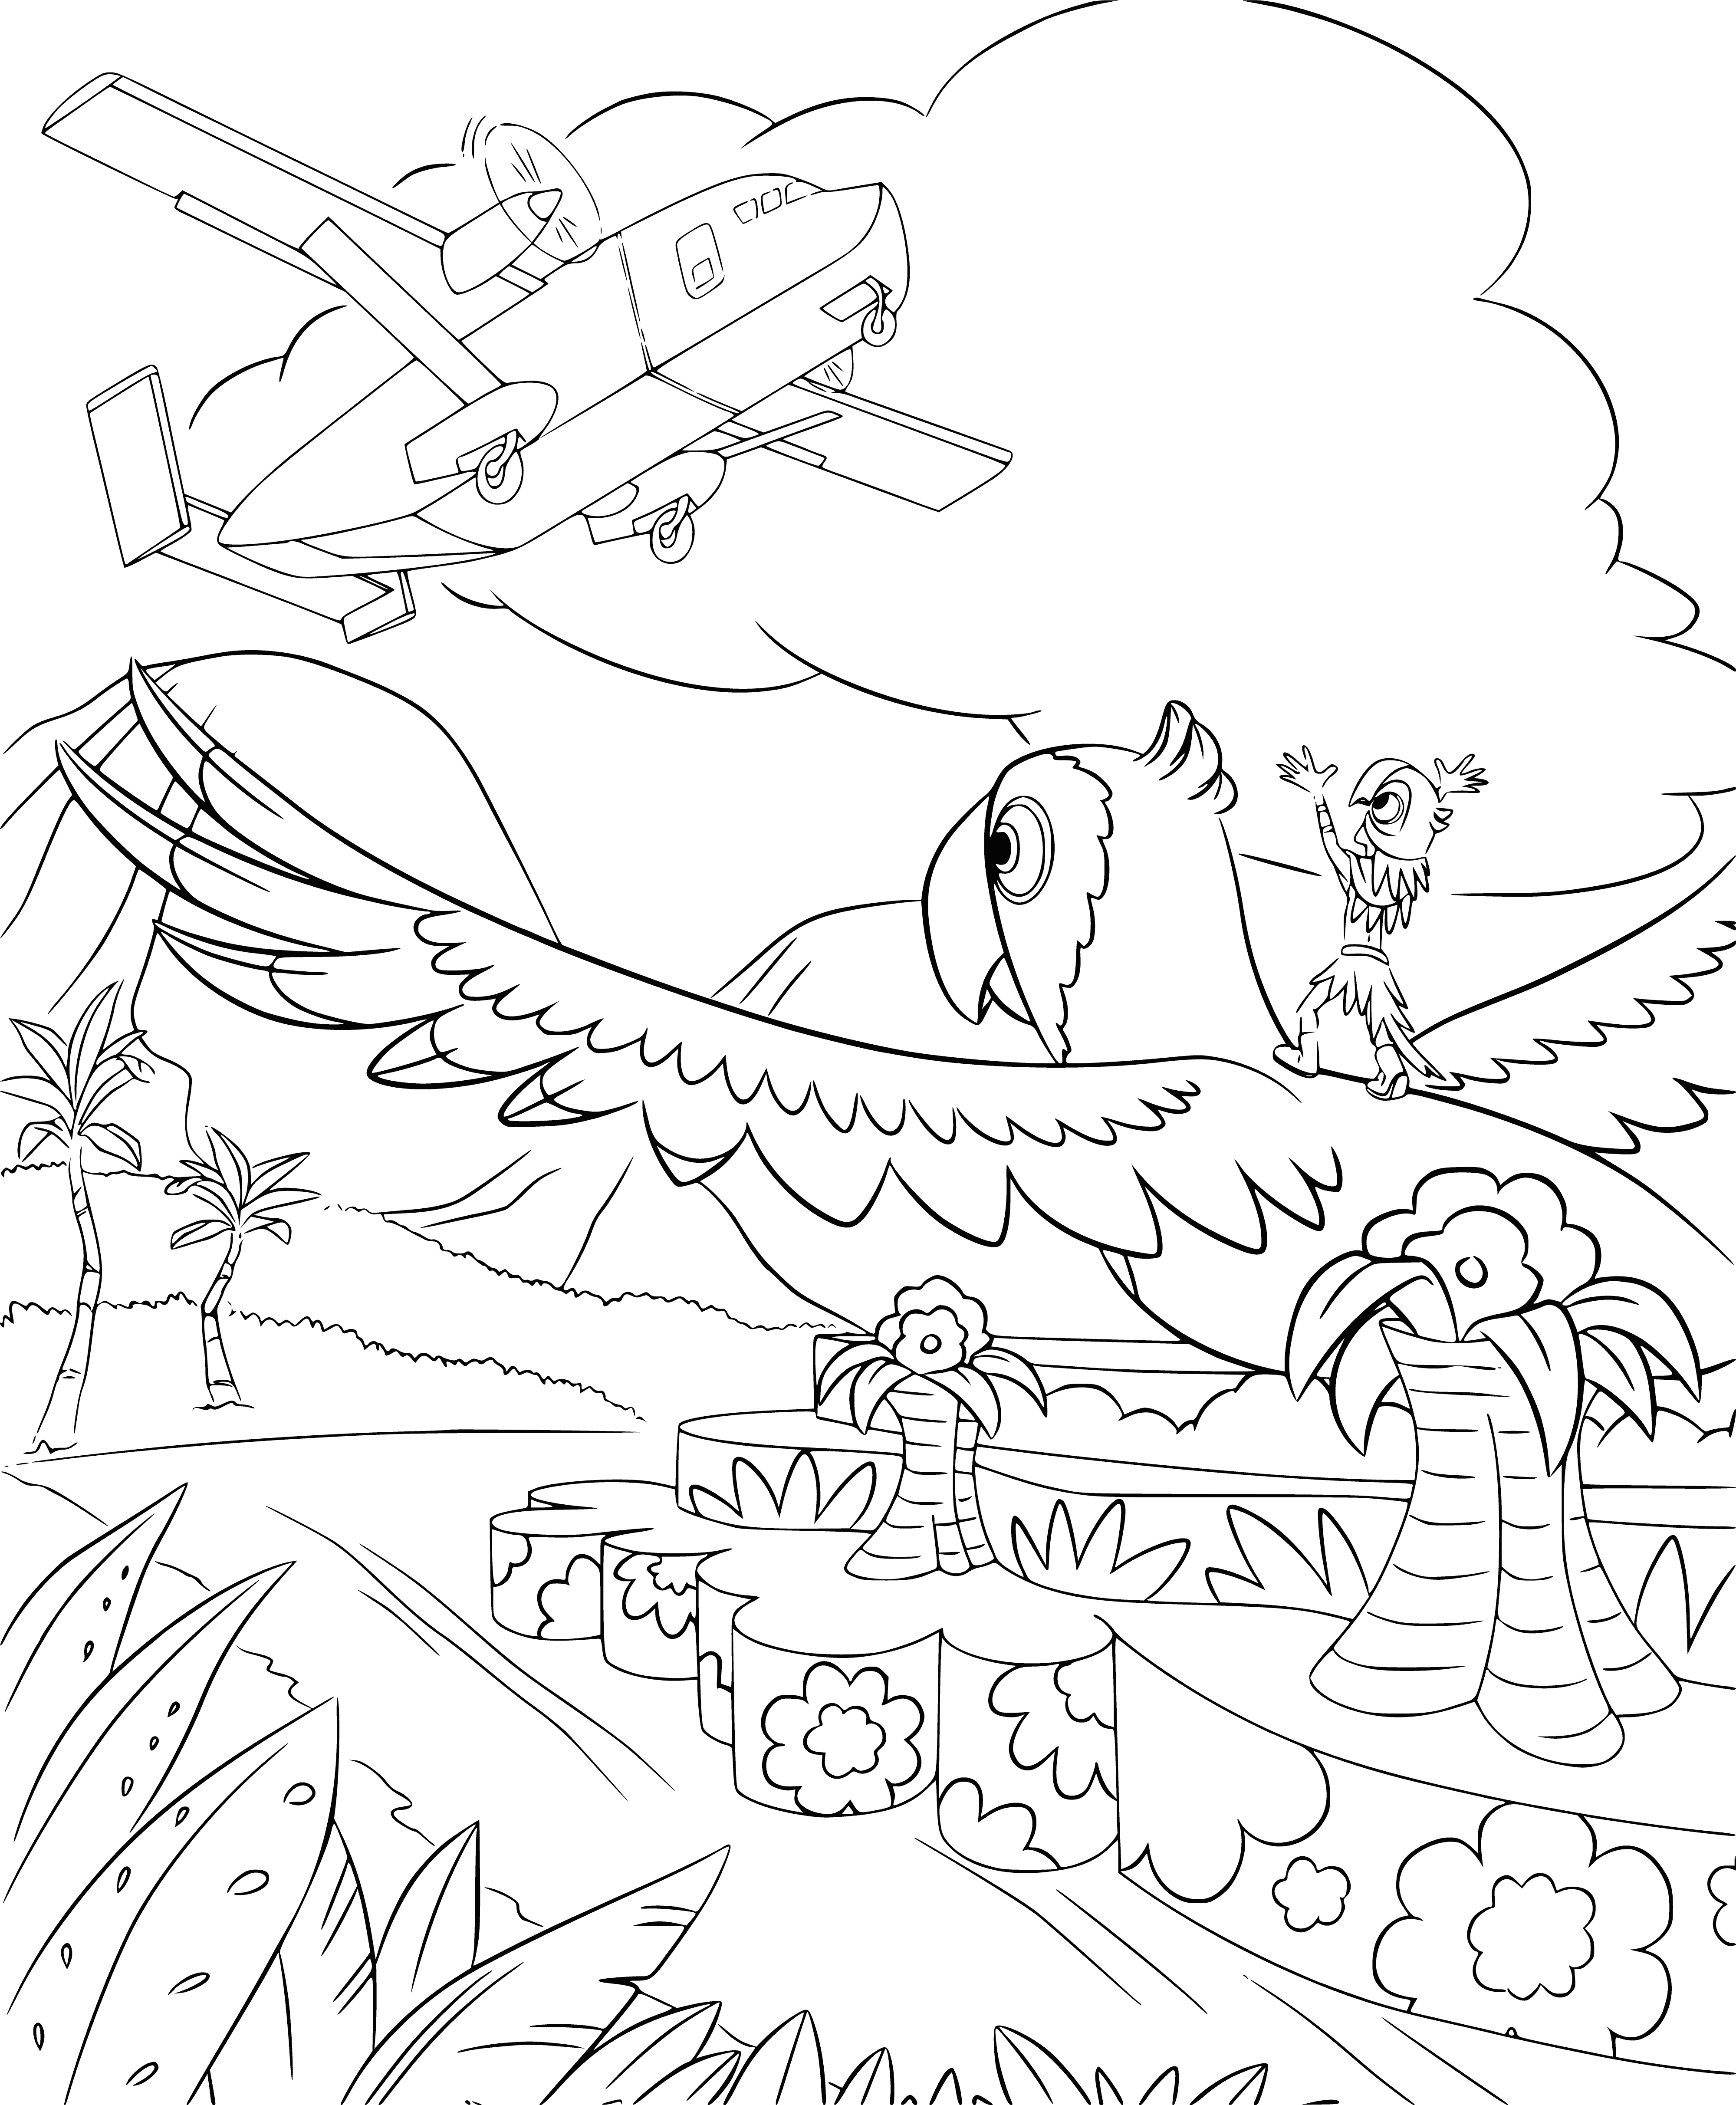 The chase continues coloring page